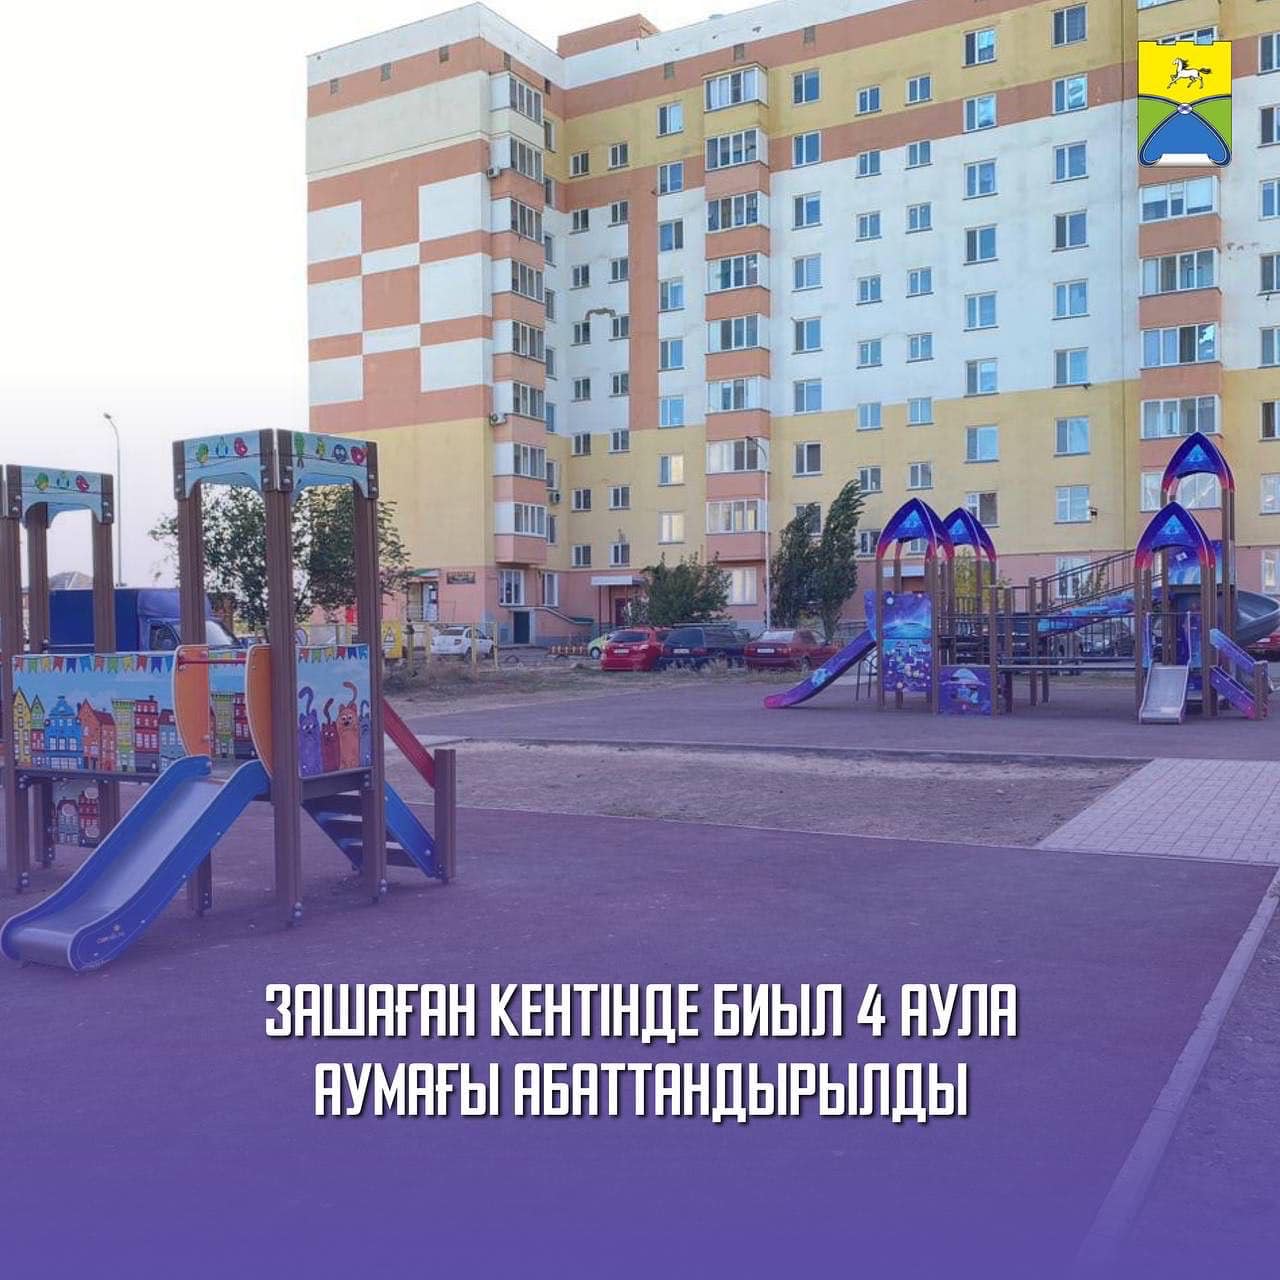 Improvement of 4 courtyards on the territory of the village of Zachagansk